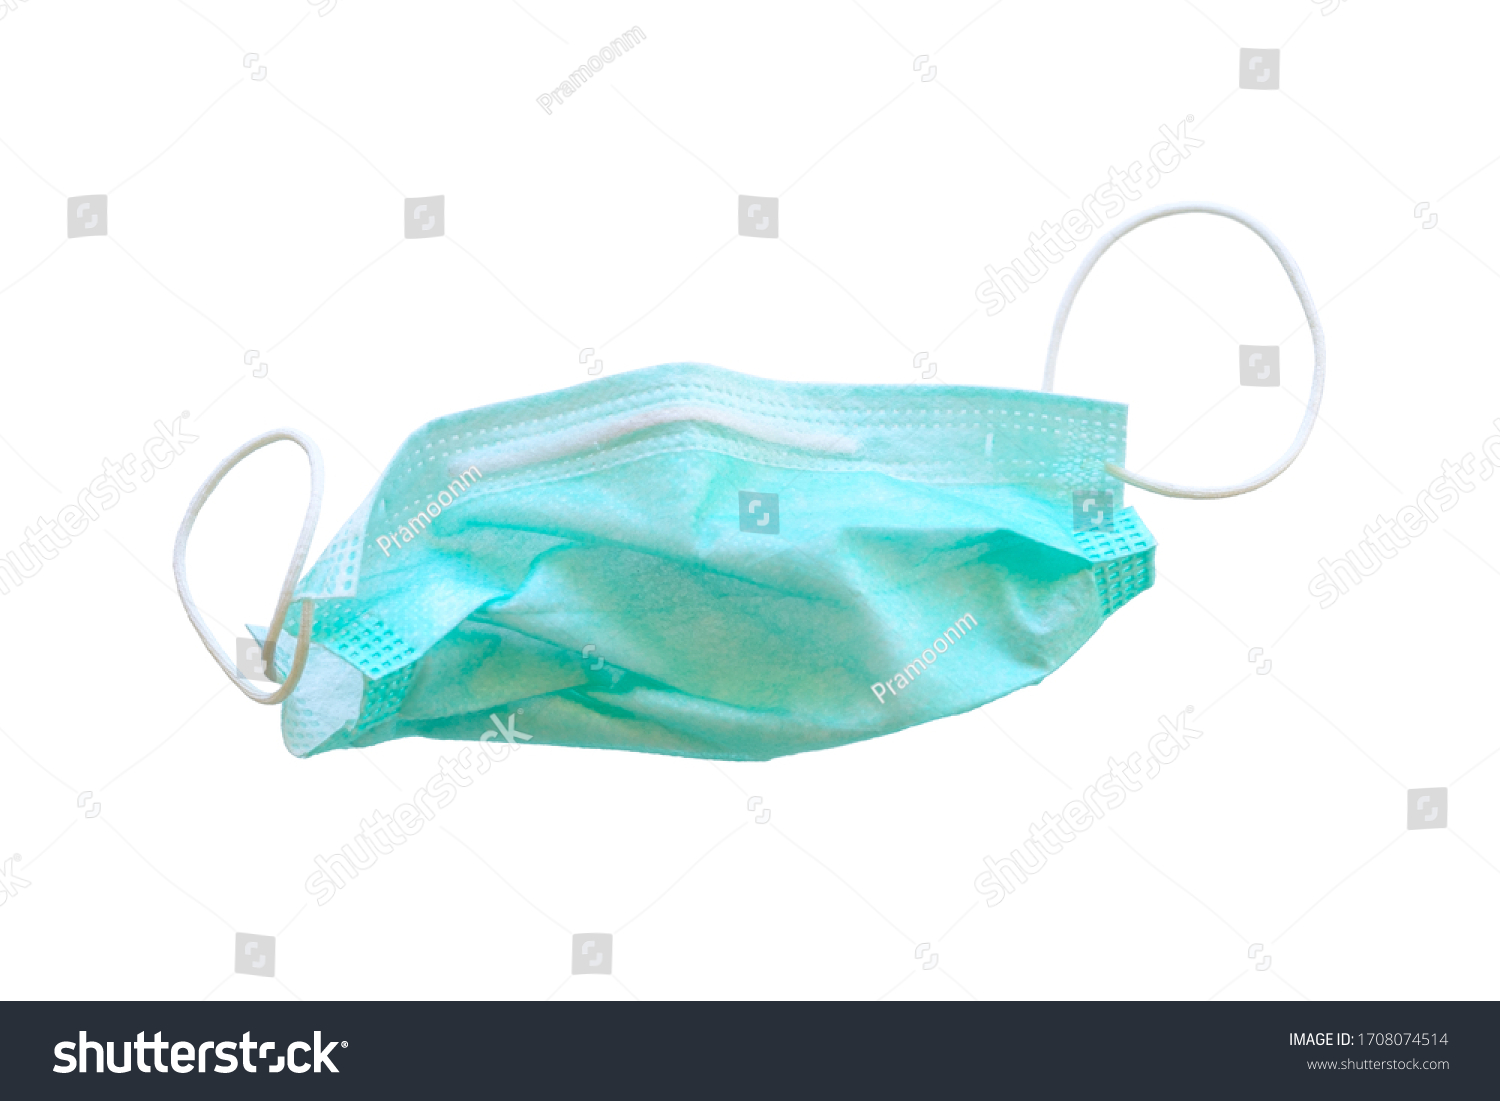 Used green medical surgical mask, Medical protective mask on white background. Disposable surgical face mask cover the mouth and nose. Selective focus. #1708074514